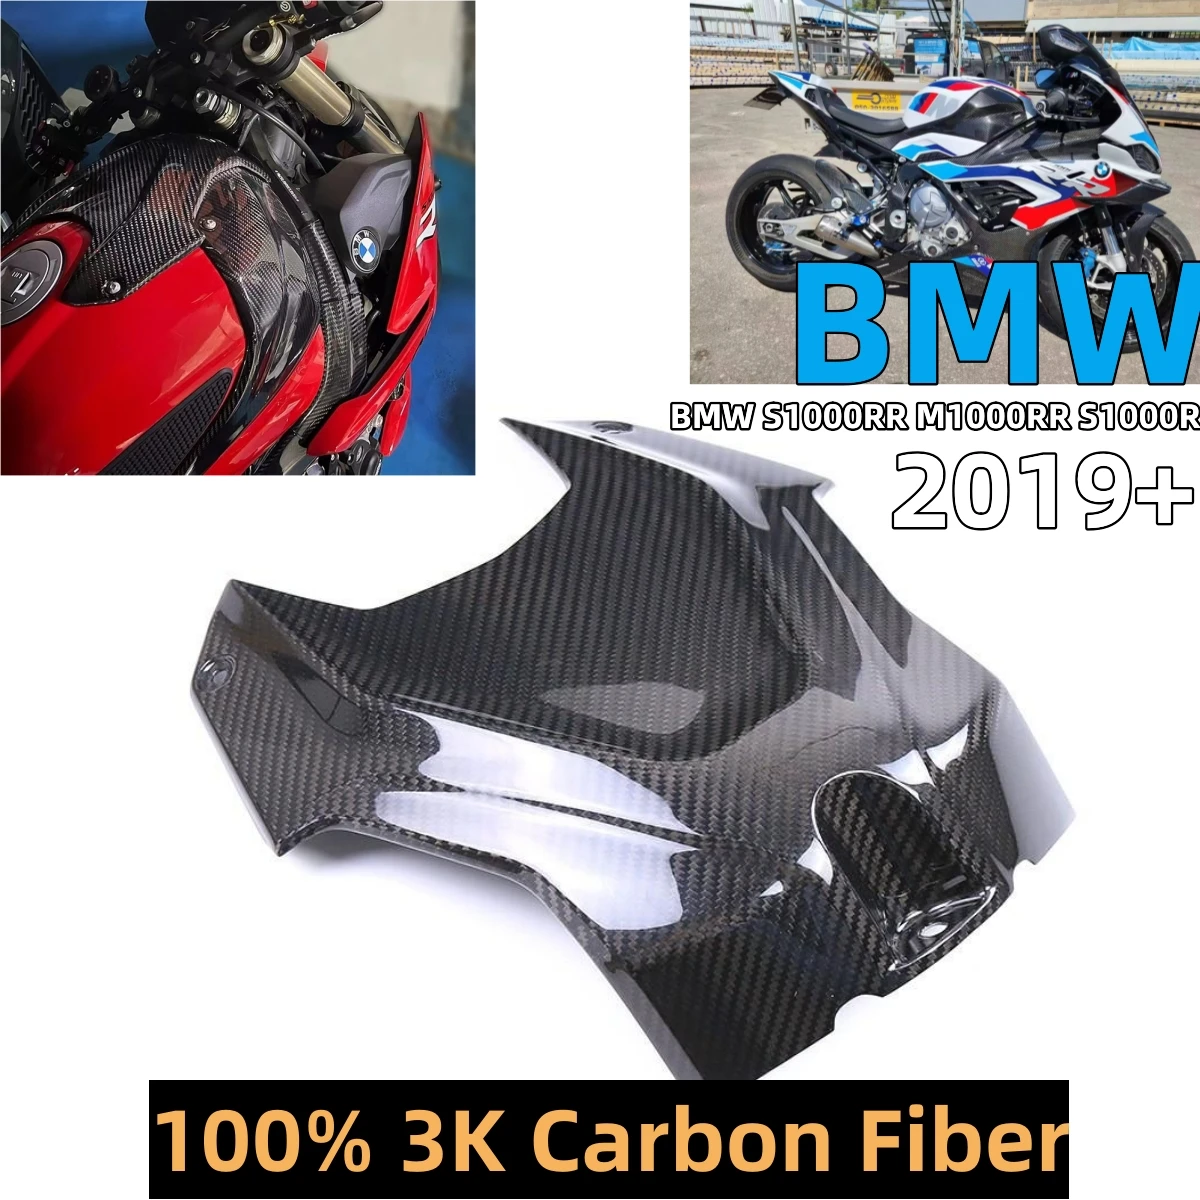 

3K Full Carbon Fiber Motorcycle Front Tank Airbox Cover Fairing Kit For BMW S1000RR M1000RR S1000R 2019 2020 2021 2022 2023